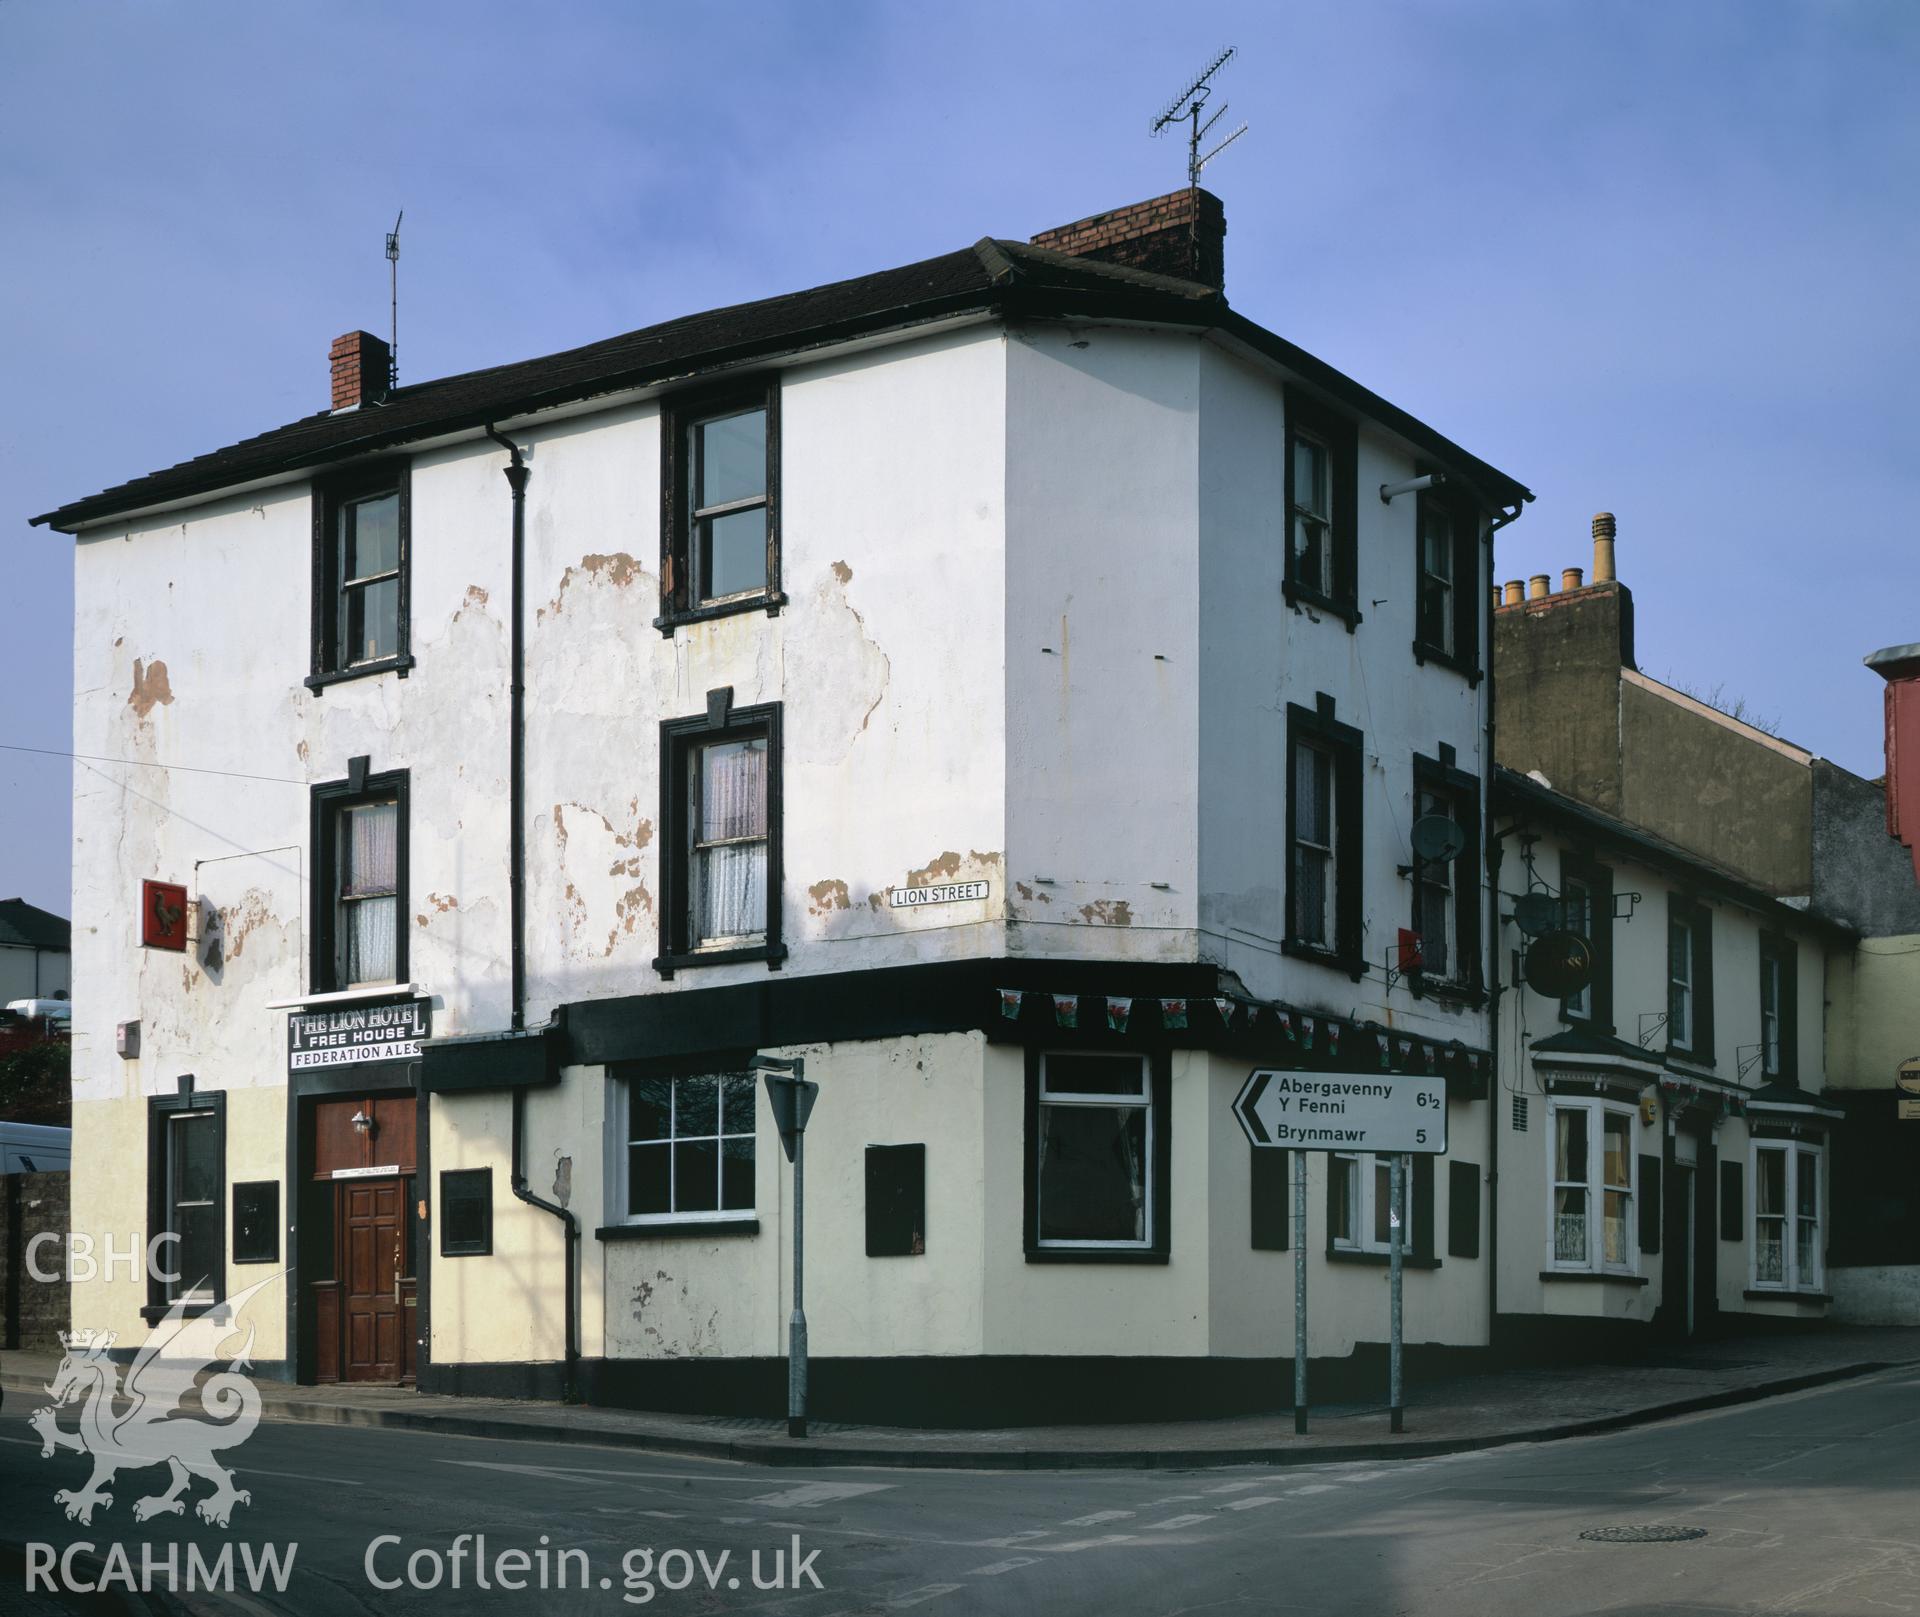 RCAHMW colour transparency showing exterior view of the Lion Hotel, Broad Street, Blaenavon.